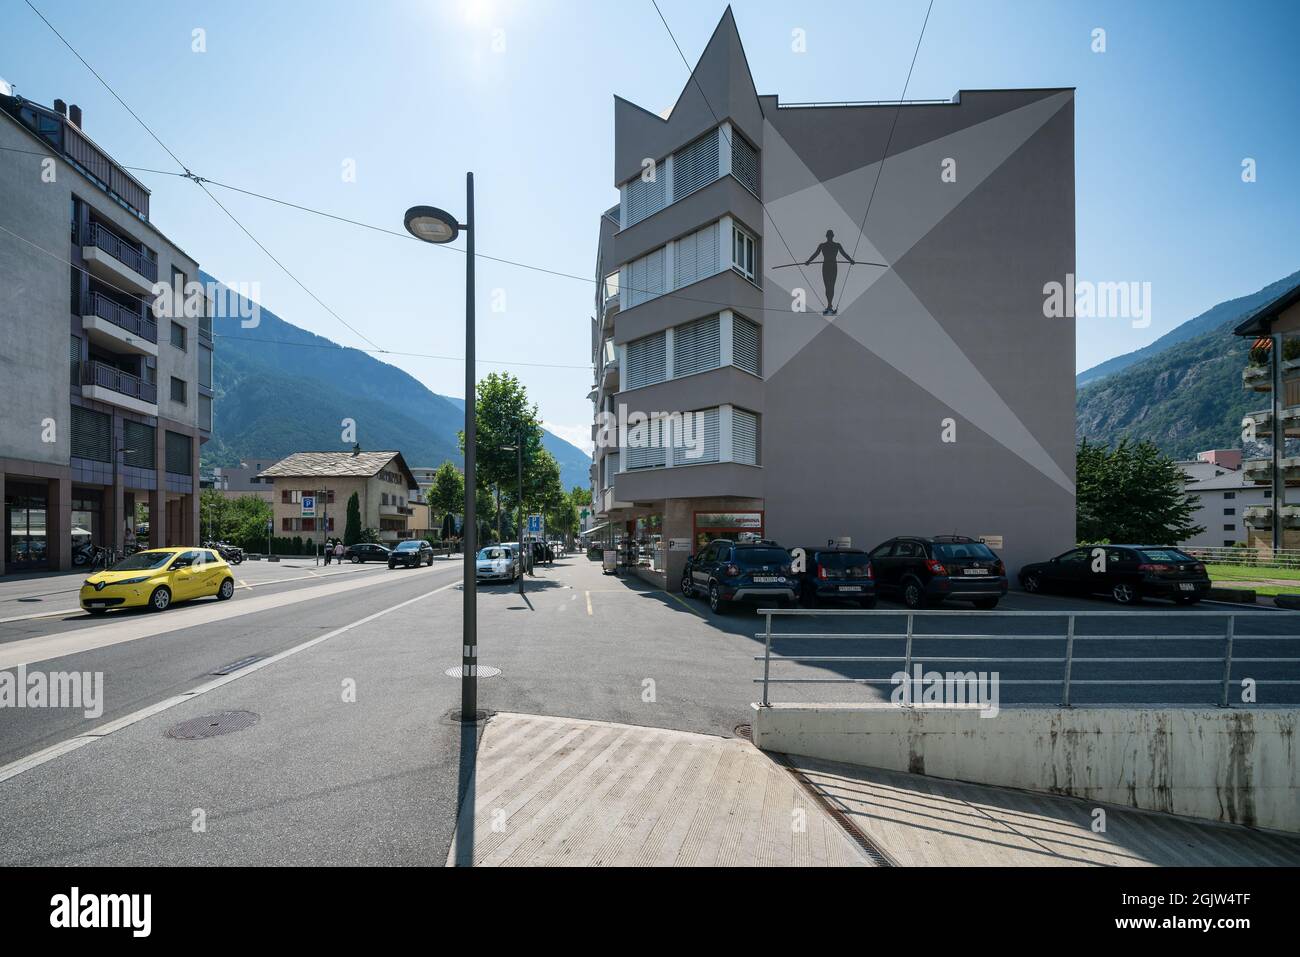 A mural of a tightrope walker in Brig, Switzerland Stock Photo